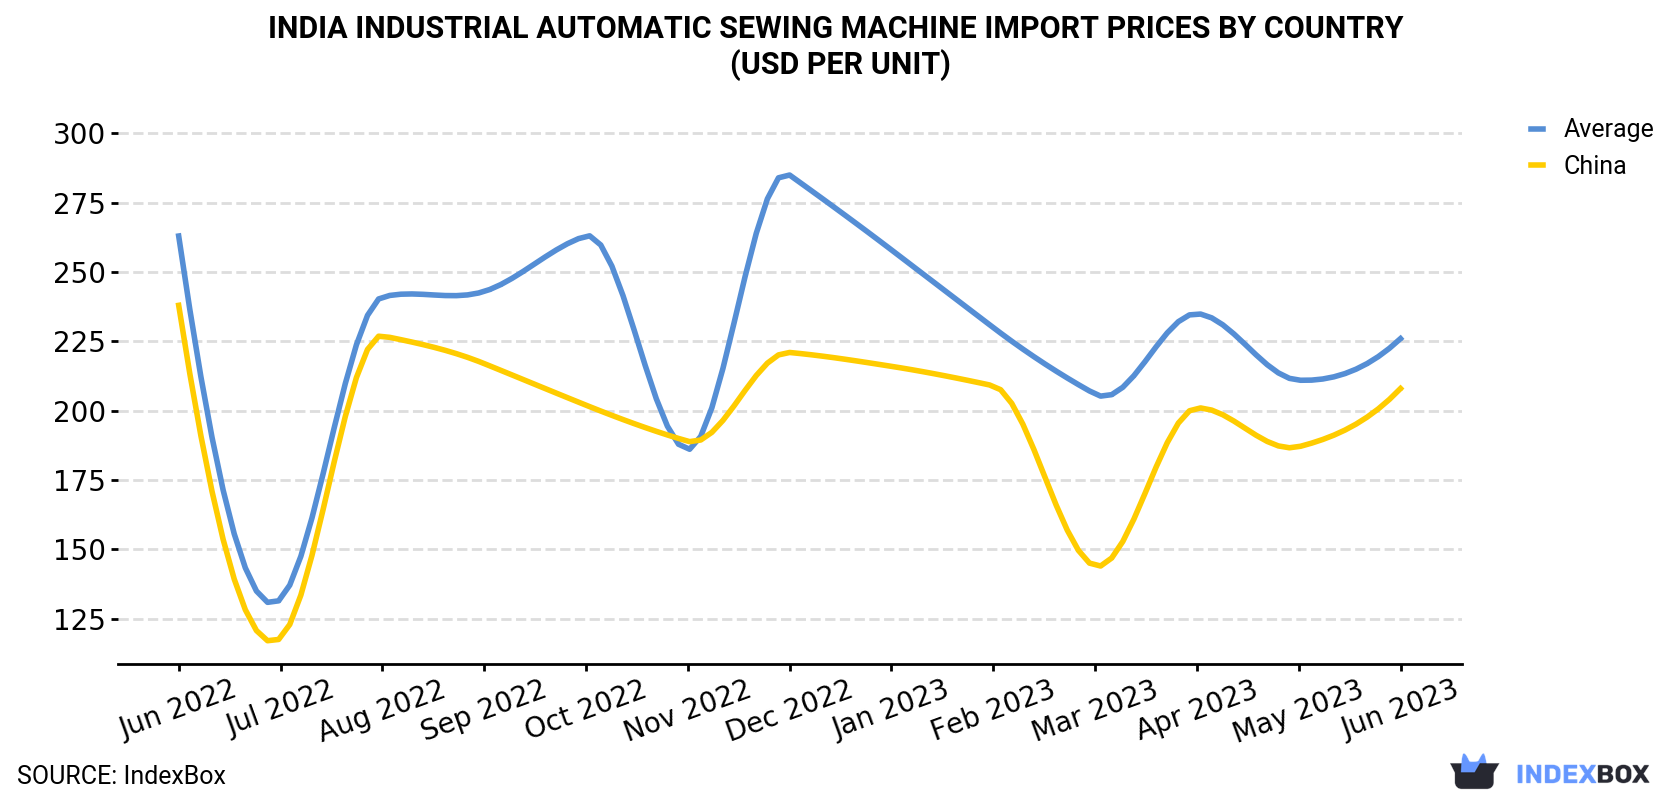 India Industrial Automatic Sewing Machine Import Prices By Country (USD Per Unit)